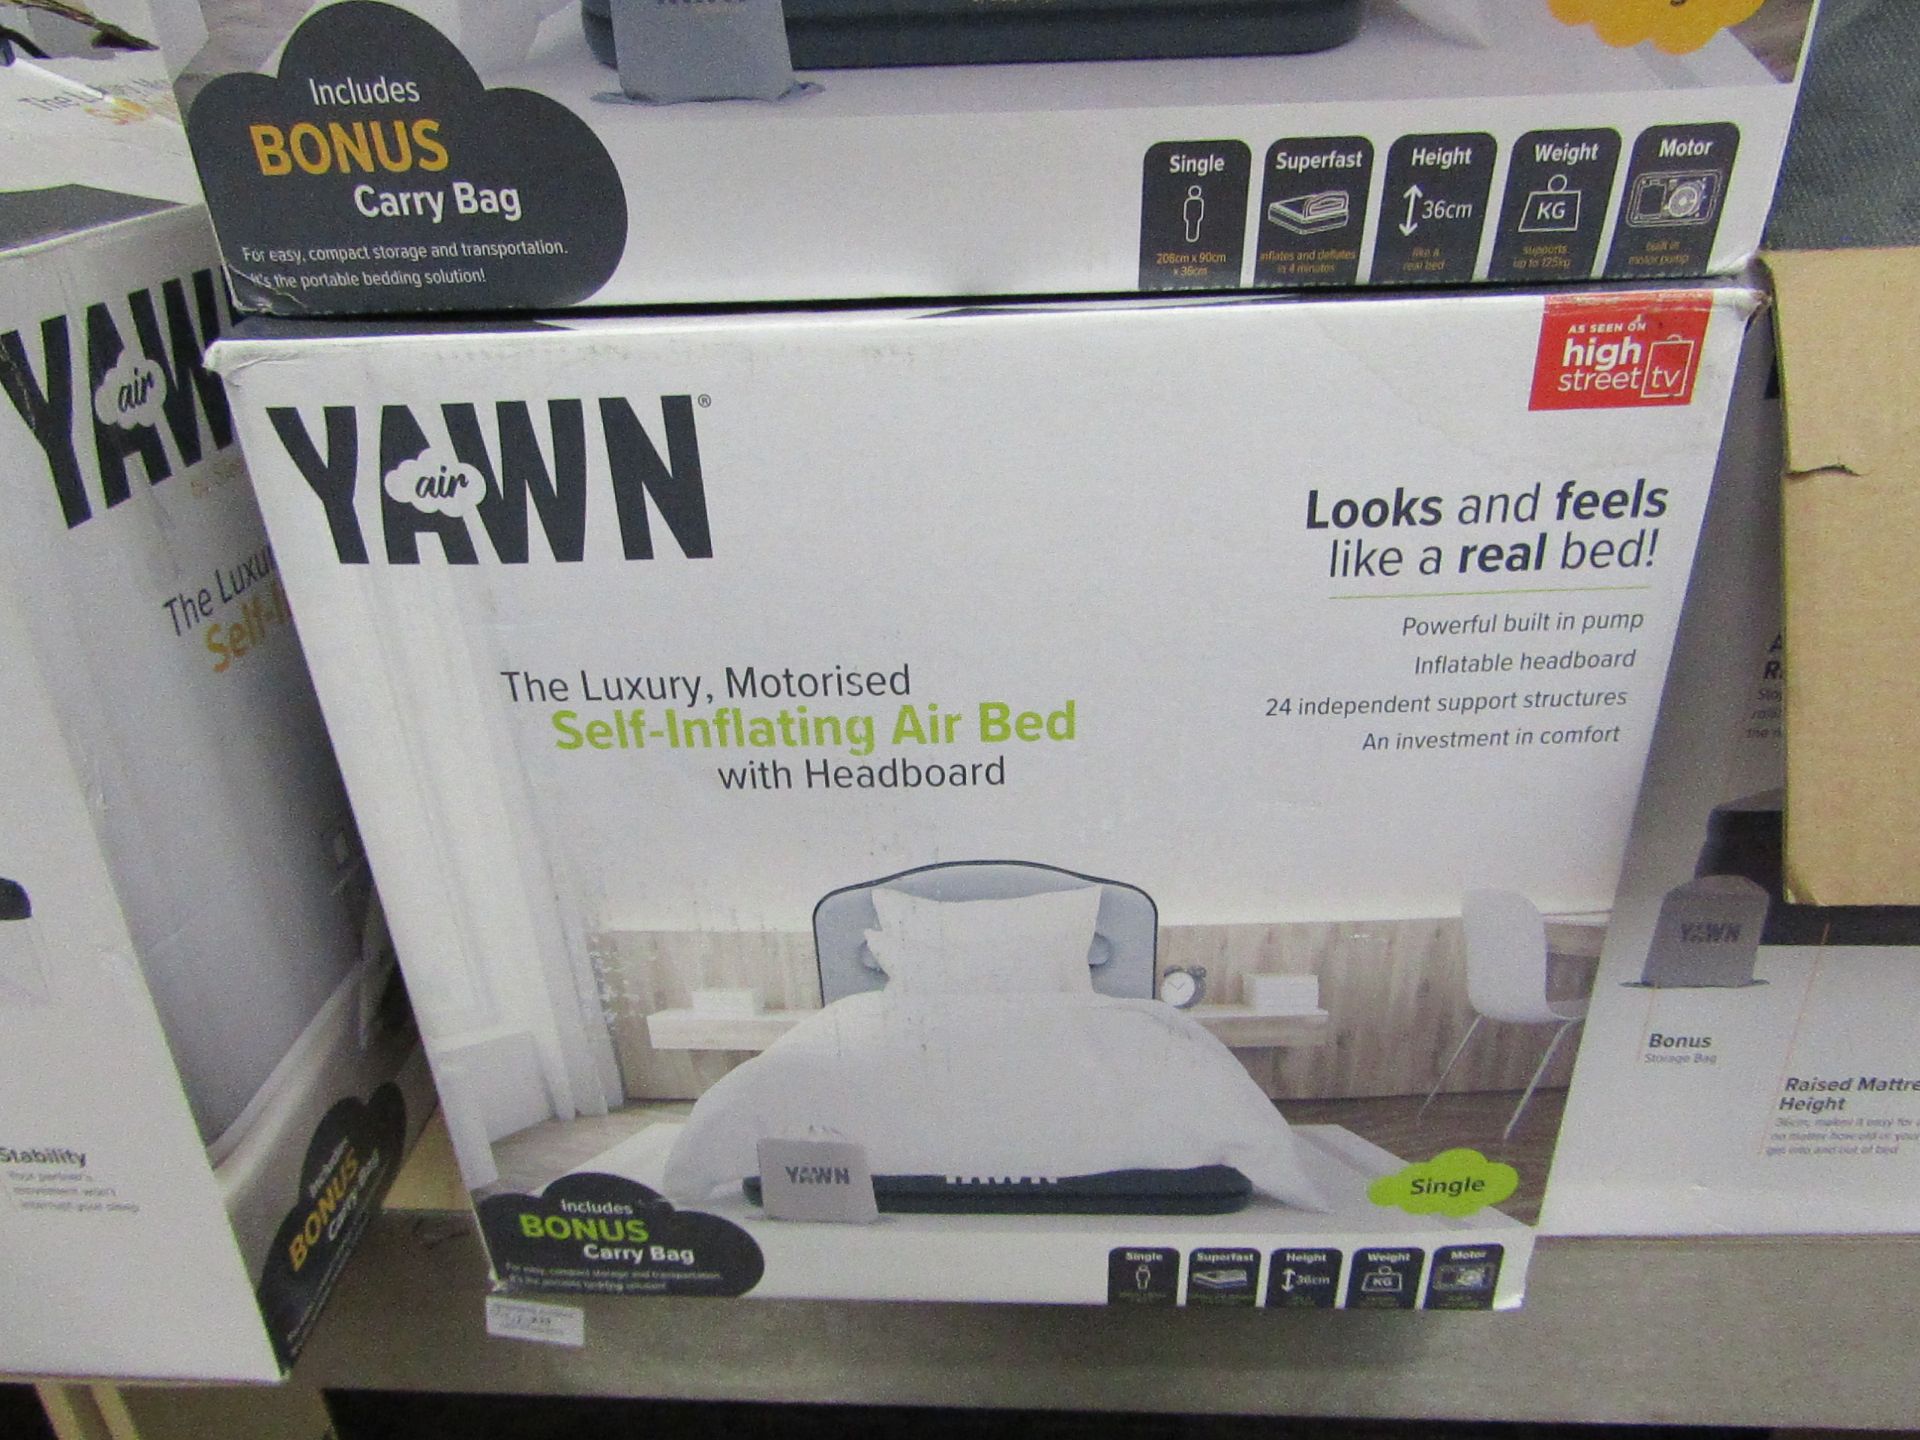 Yawn single Air bed with built in Pump, boxed (box may be damaged), item is unchecked, RRP £59.99 at